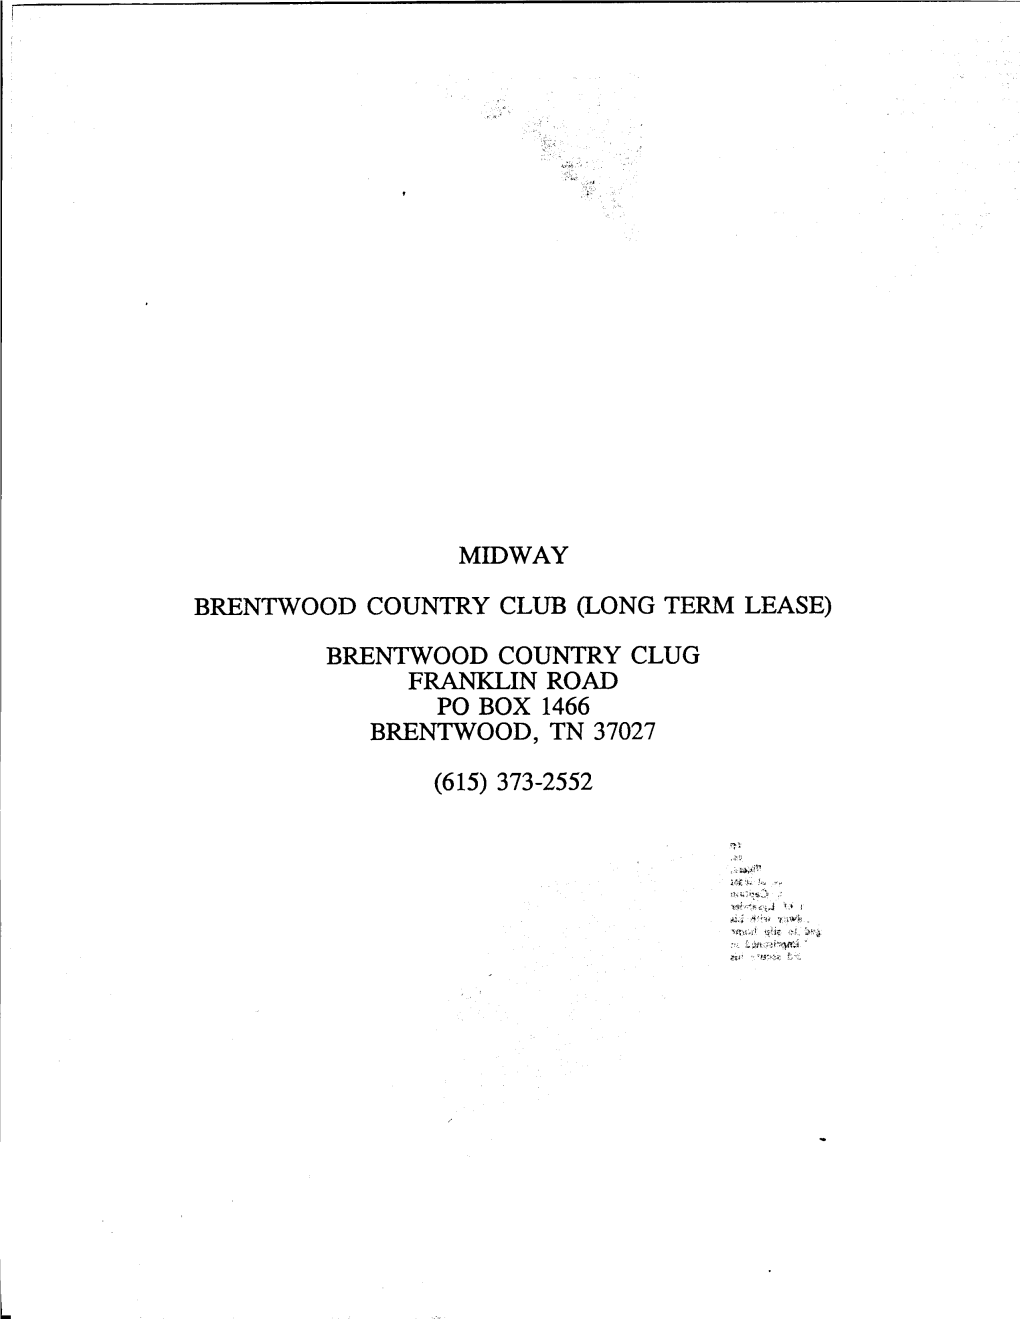 Millway BRENTWOOD COUNTRY CLUB (LONG TERM LEASE) BRENTWOOD COUNTRY CLUG FRANKLIN ROAD PO BOX 1466 BRENTWOOD, TN 37027